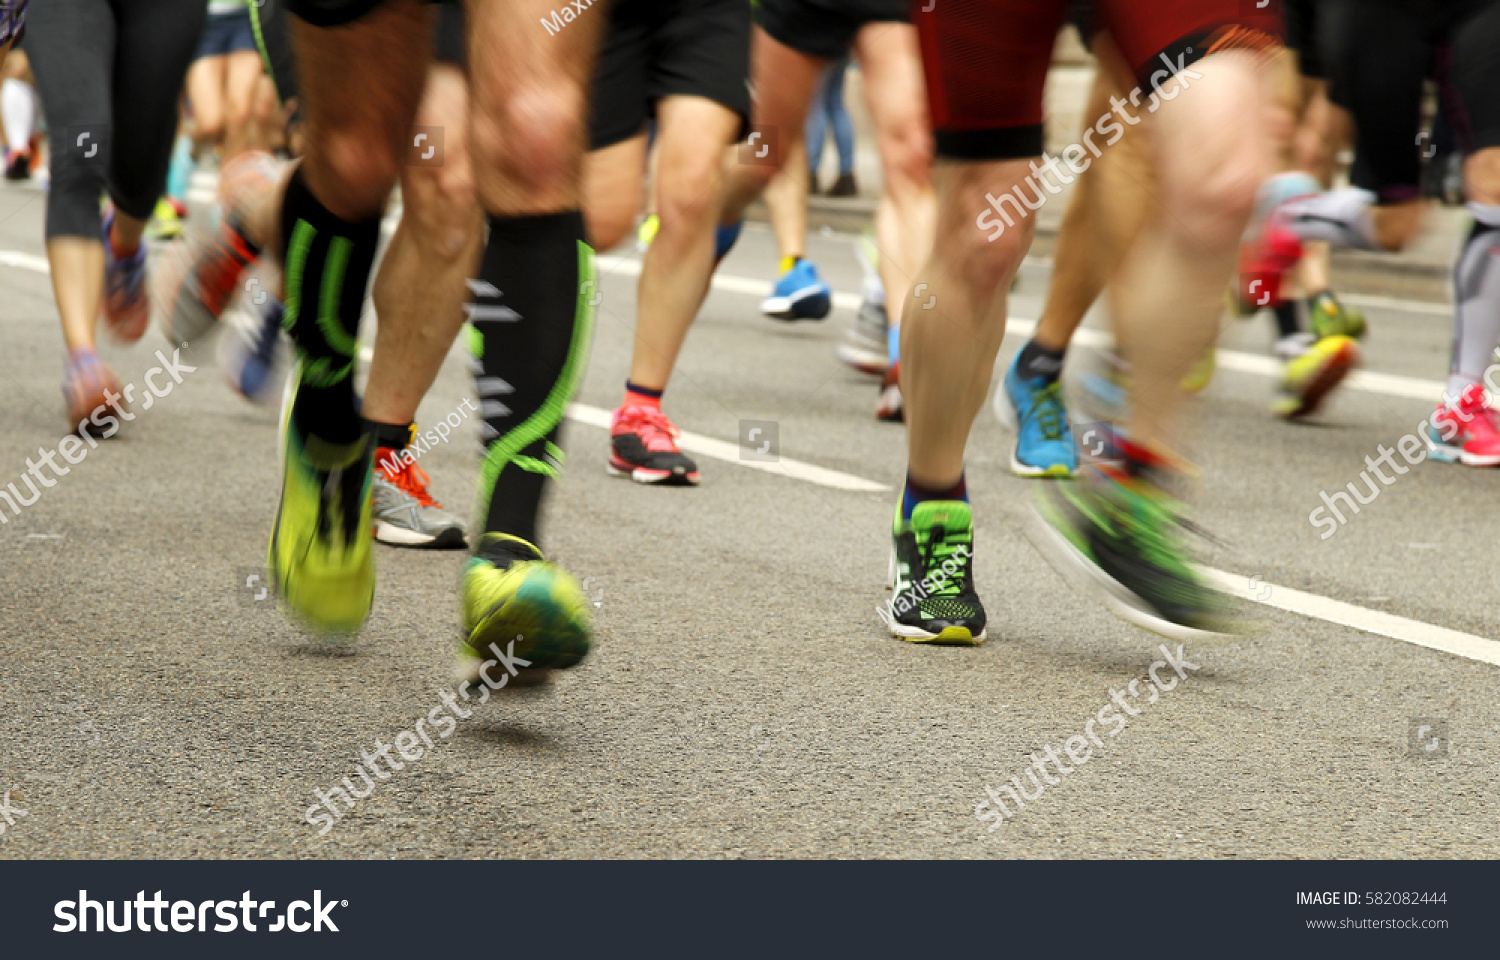 Runners feet on the road in blur motion during a long distance running event #582082444